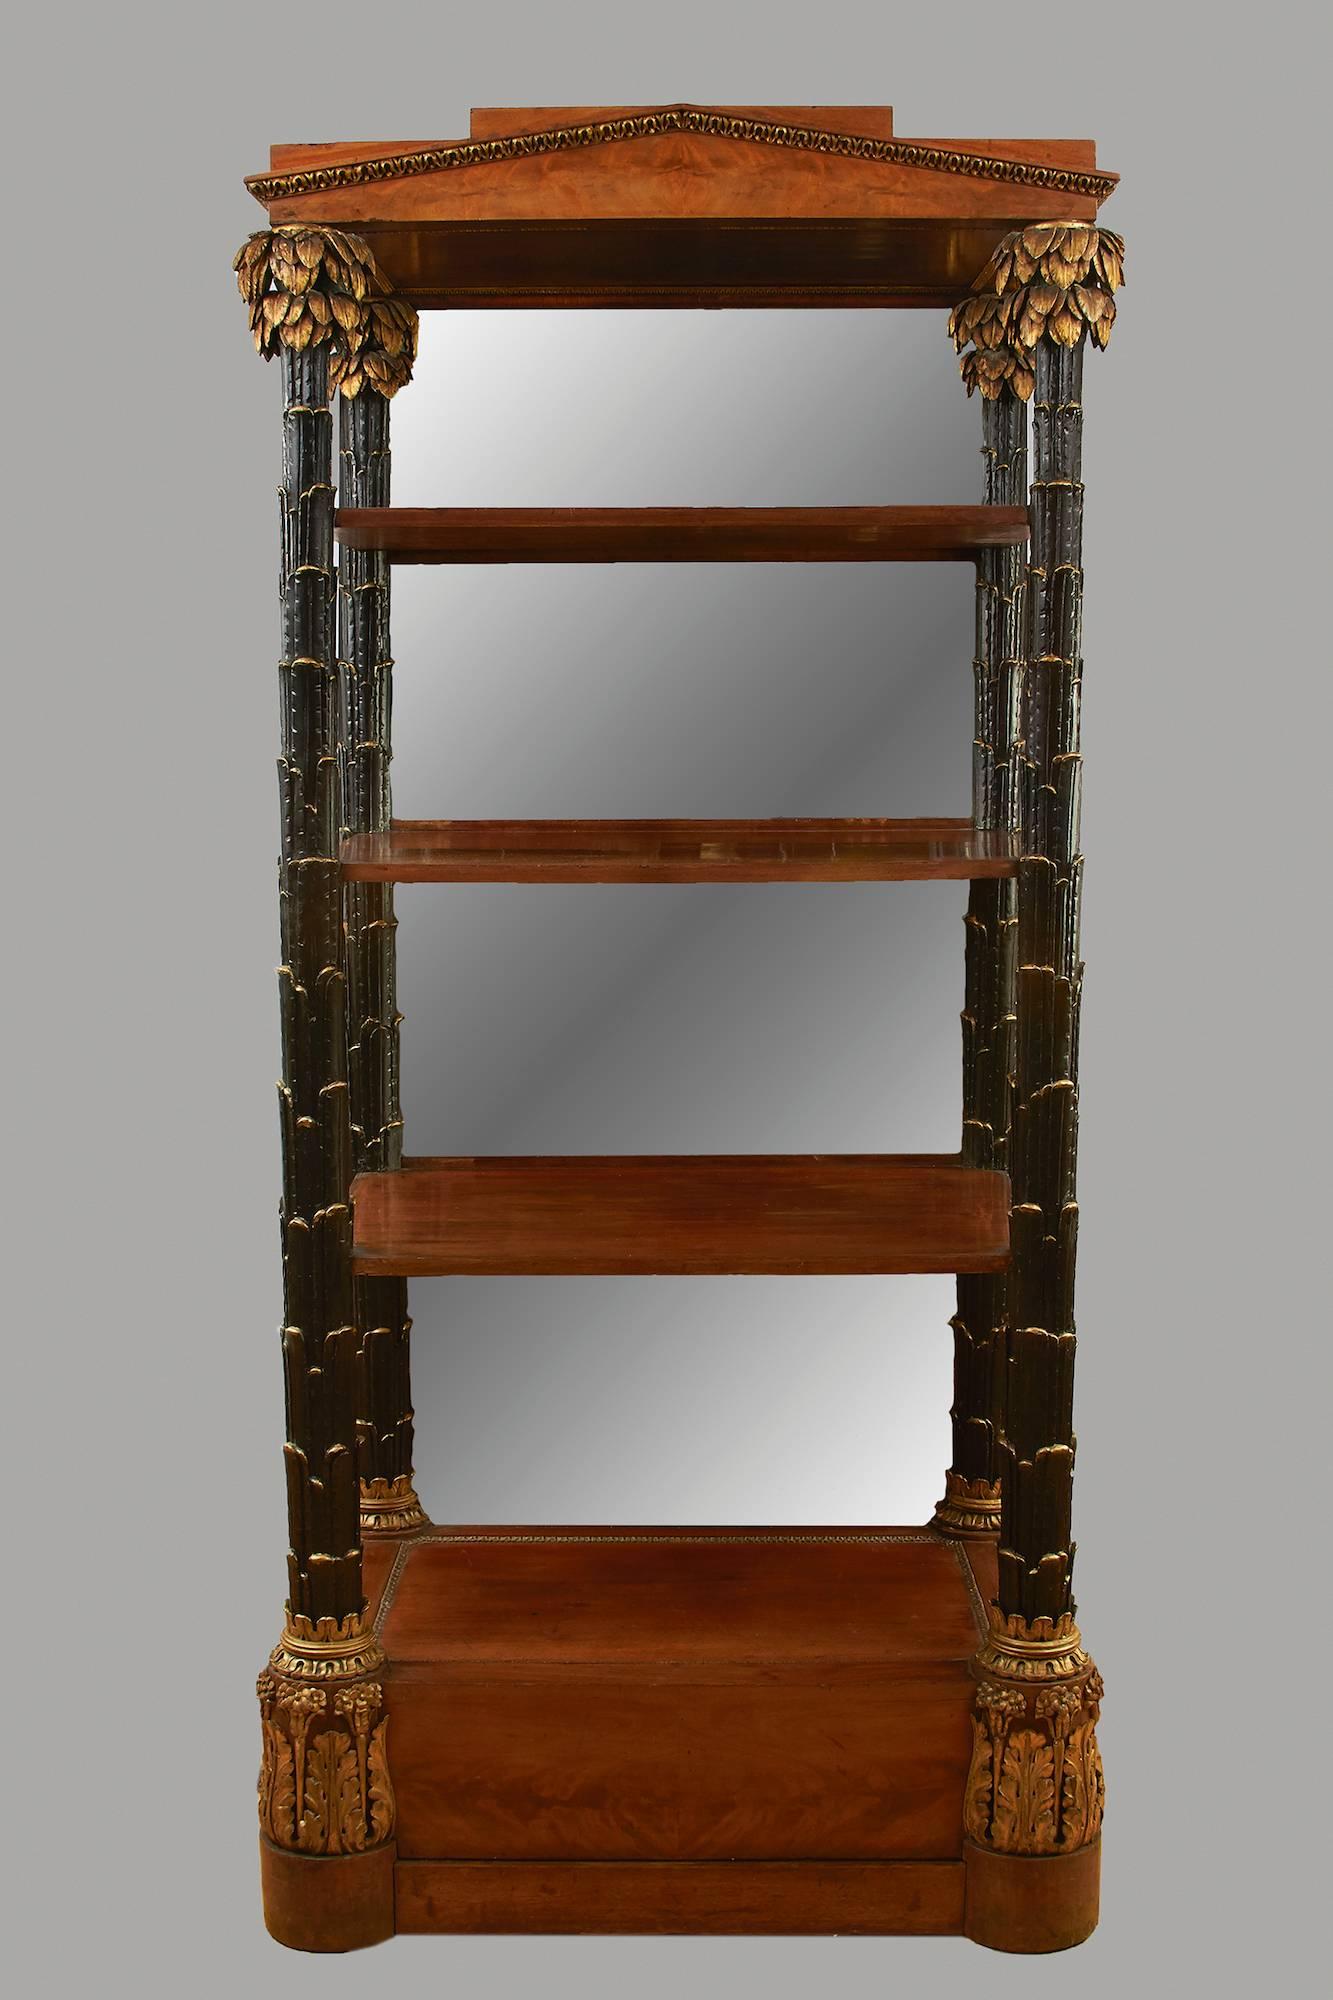 A magnificent and impressive ebonized and parcel-gilt pale mahogany etagere of architectural form, the parcel-gilt pediment supported by four columns of organic form with carved leaf capitals, supporting three shelves, the back inset with mirrors,